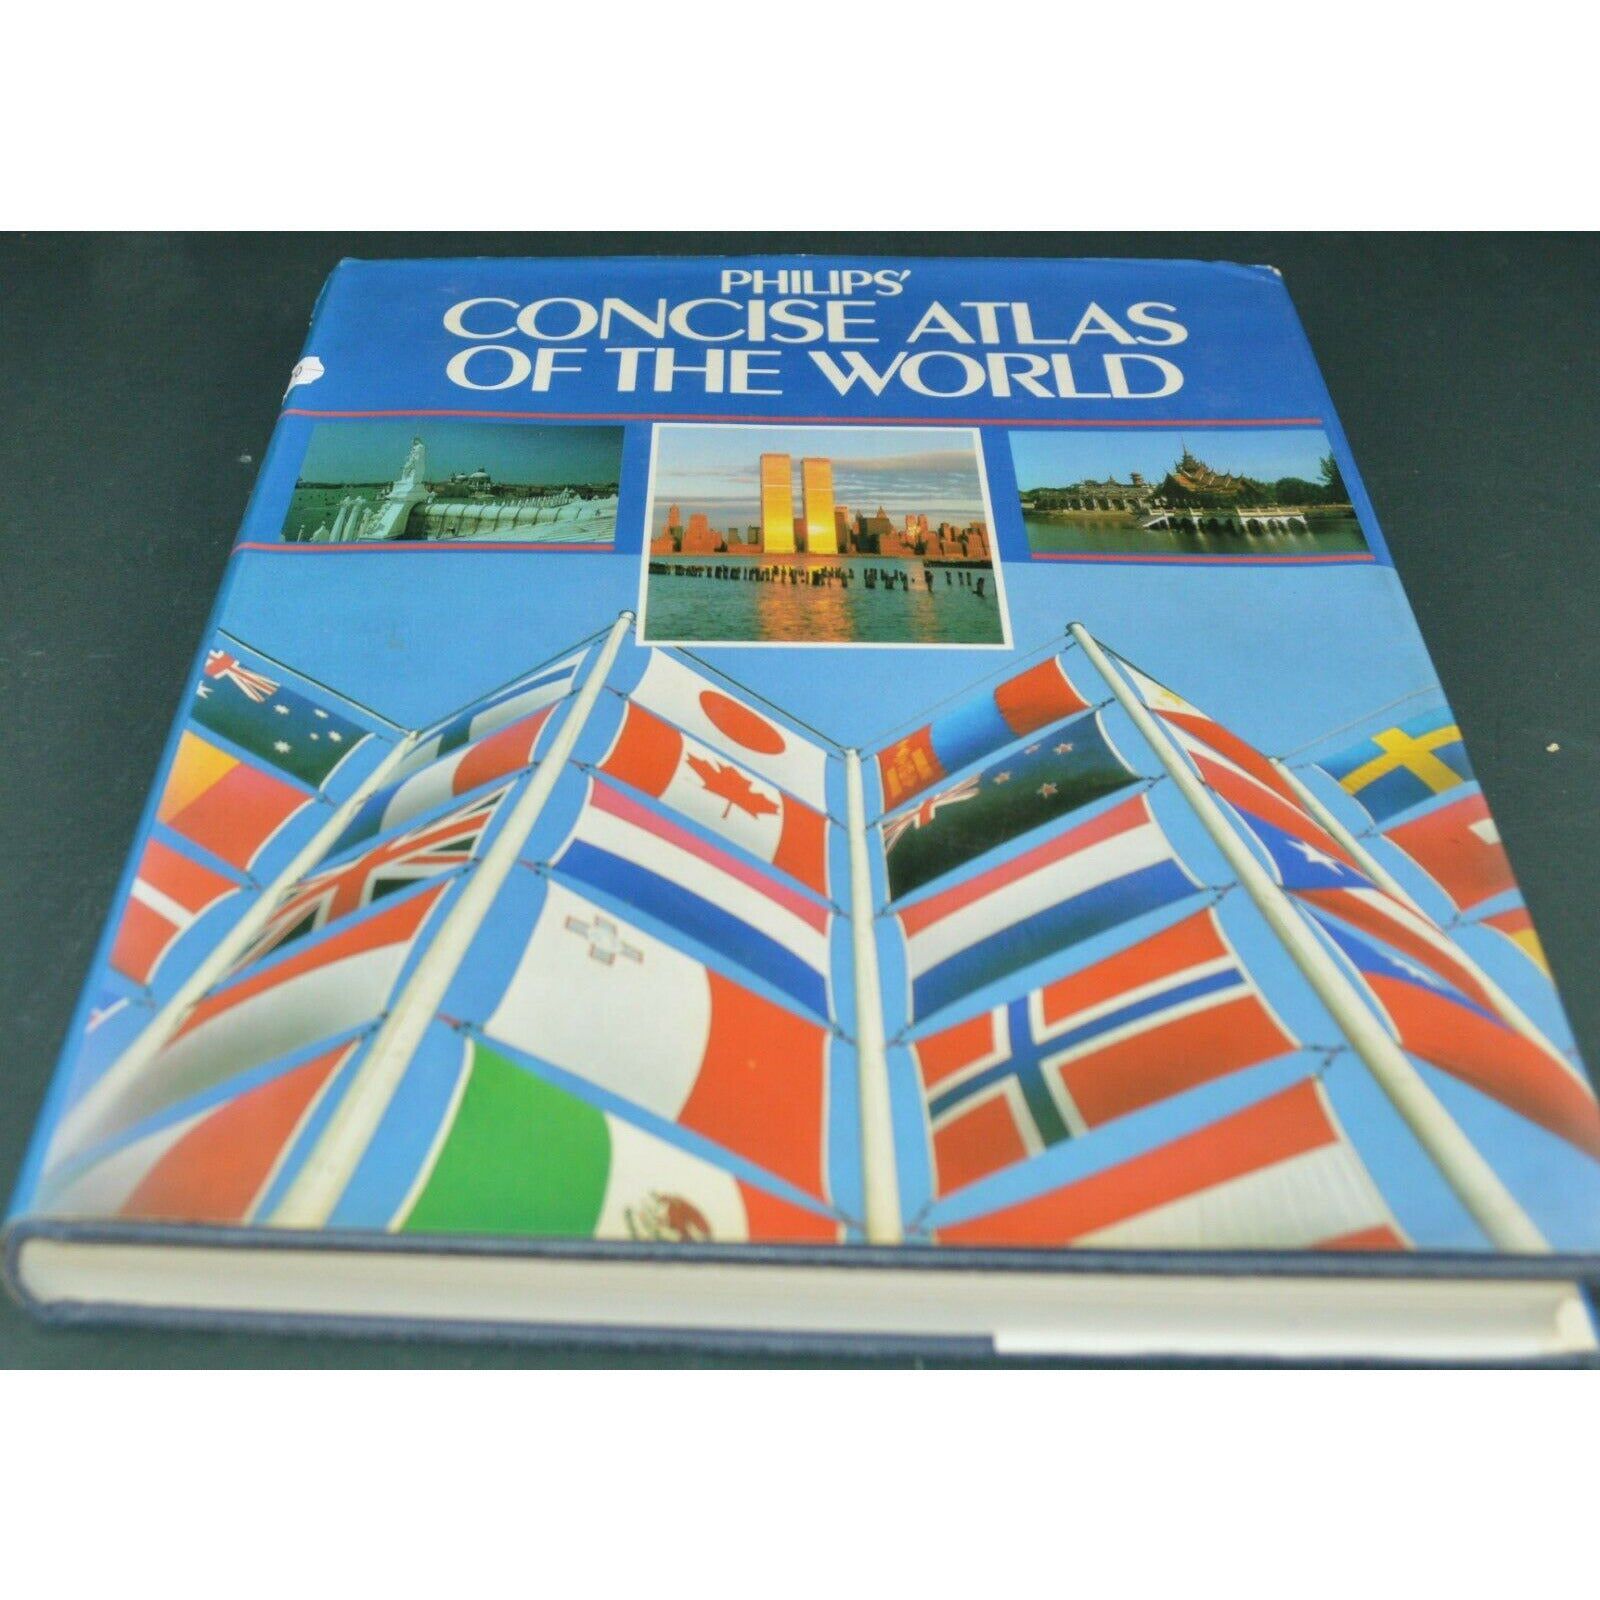 3 SECONDHAND BOOKS ATLAS OF THE WORLD/AMERICA | SECONDHAND BOOKS - TMD167207